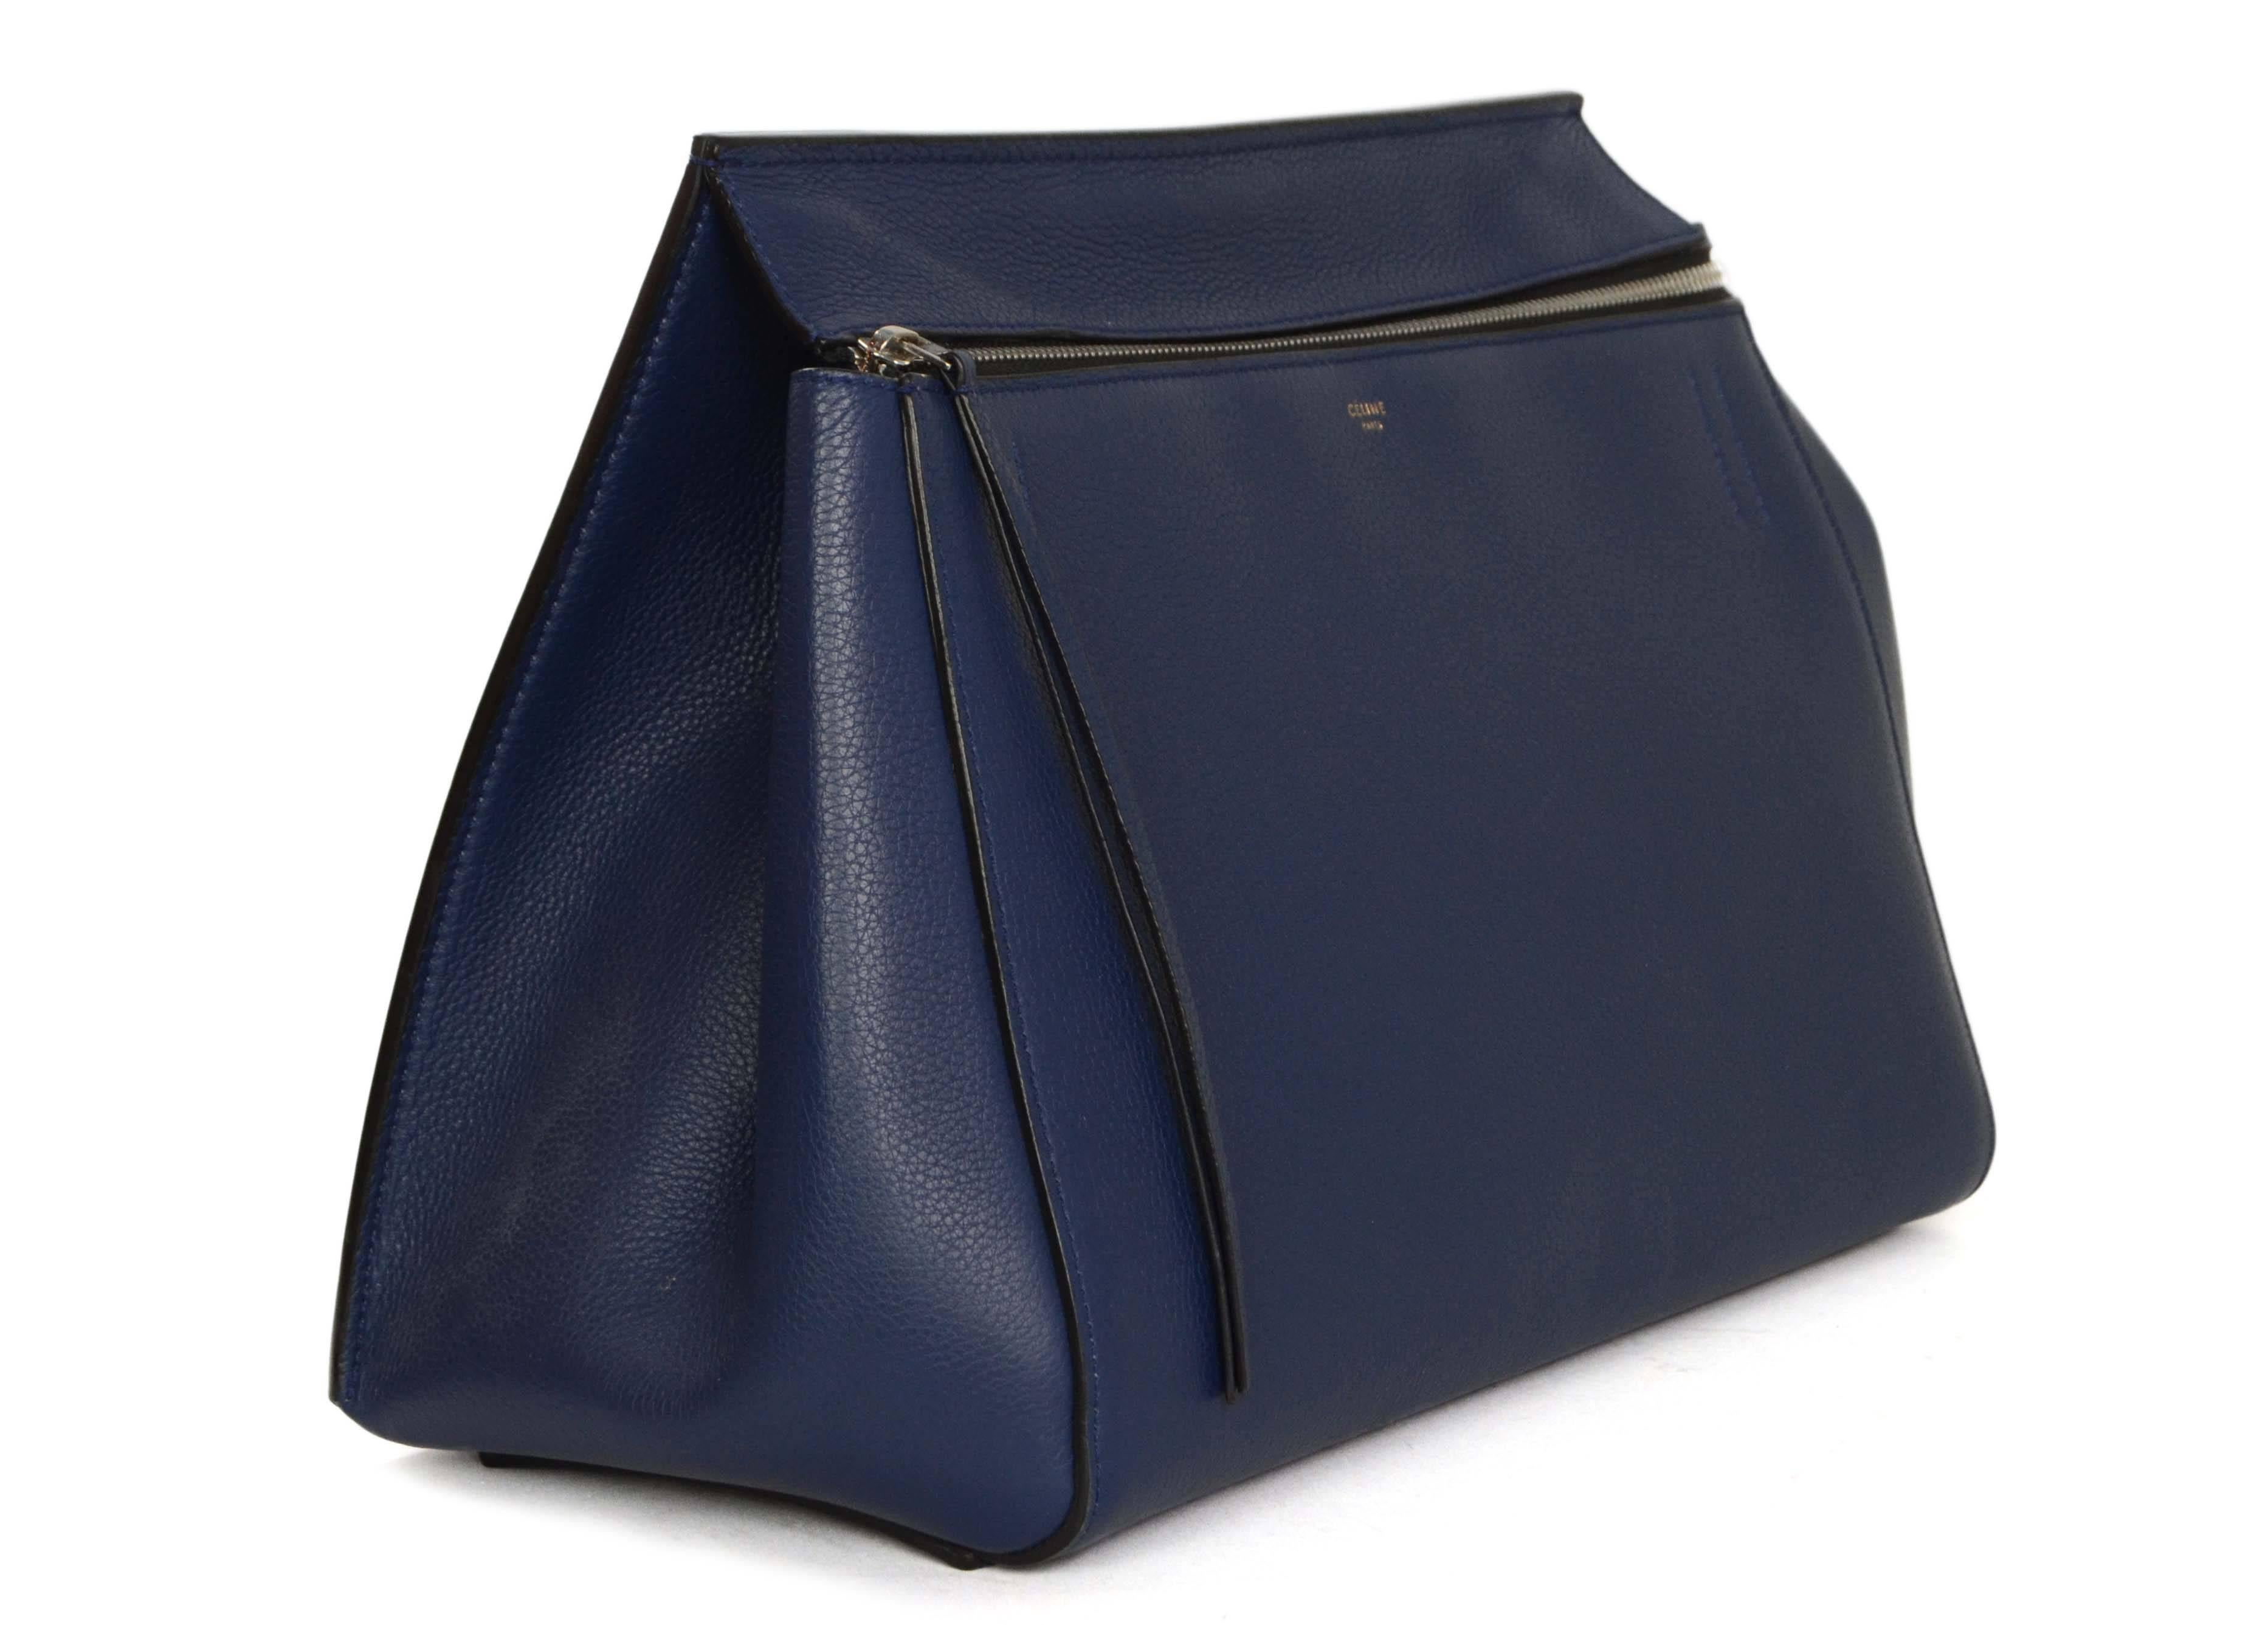 Celine Blue Leather Medium Edge Tote
Made In: Italy
Color: Blue
Hardware: Silvertone
Materials: Leather
Lining: Black leather
Closure/Opening: Zip across top
Exterior Pockets: Back patch pocket with snap button closure
Interior Pockets: One